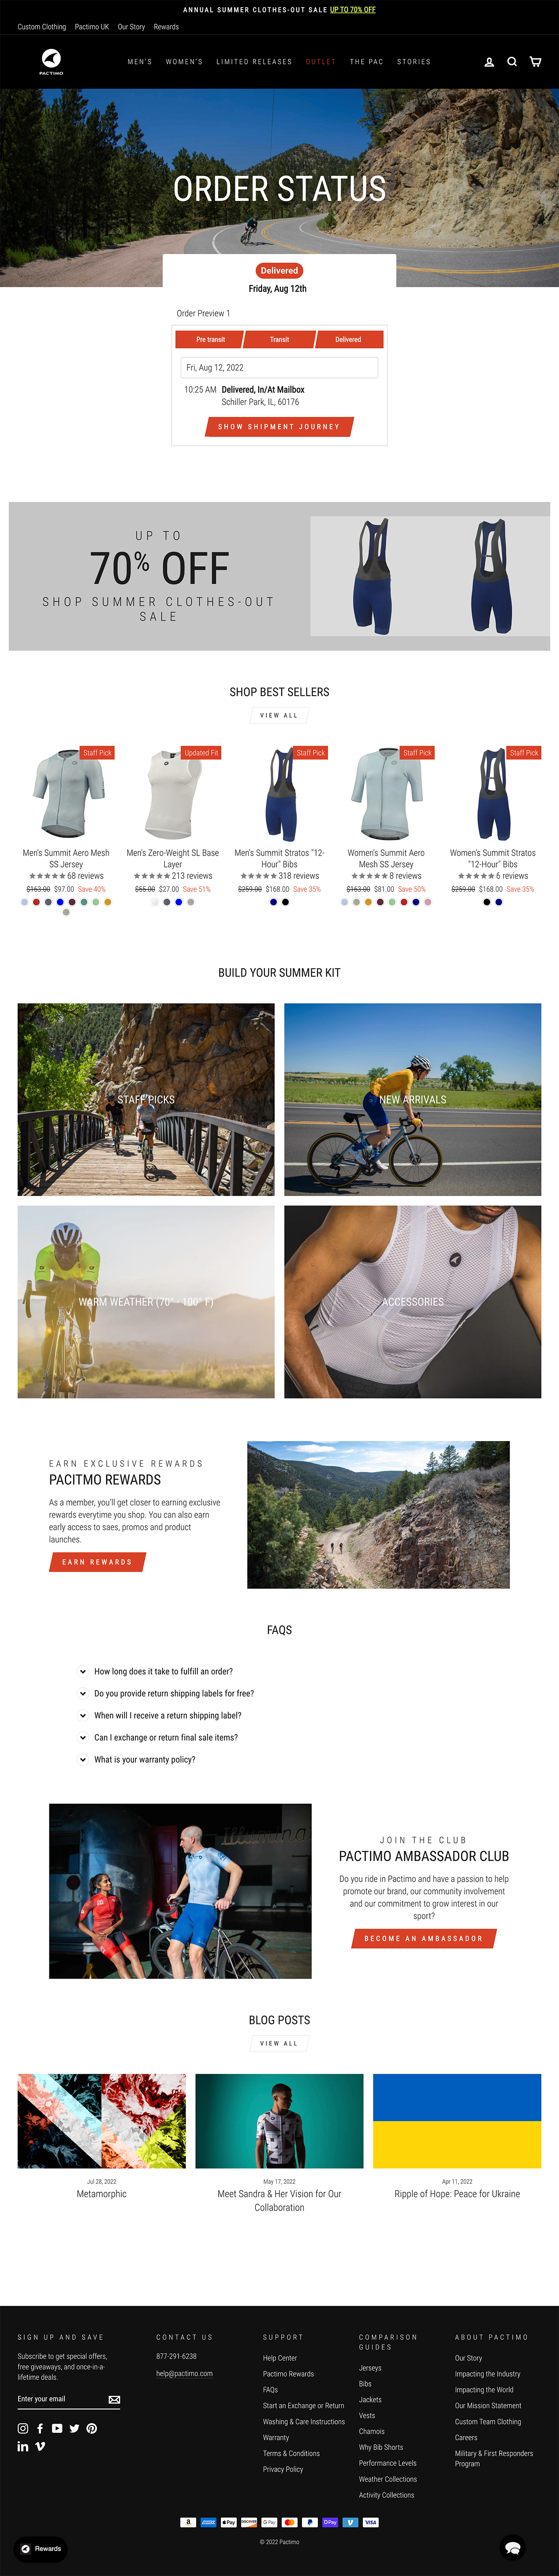 Pactimo Single-Column Apparel and Accessories Tracking Page 